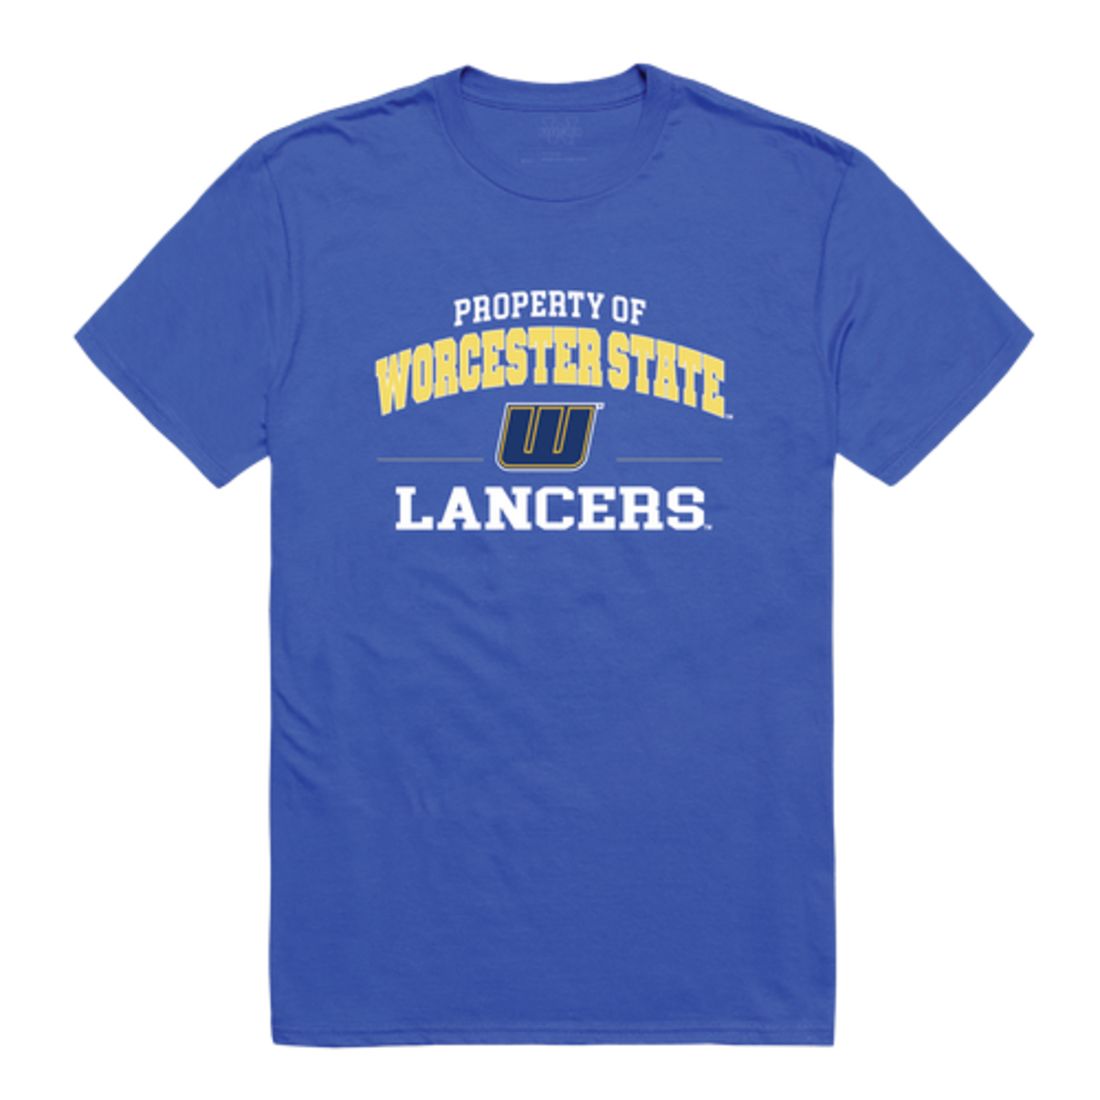 Worcester State University Lancers Property T-Shirt Tee